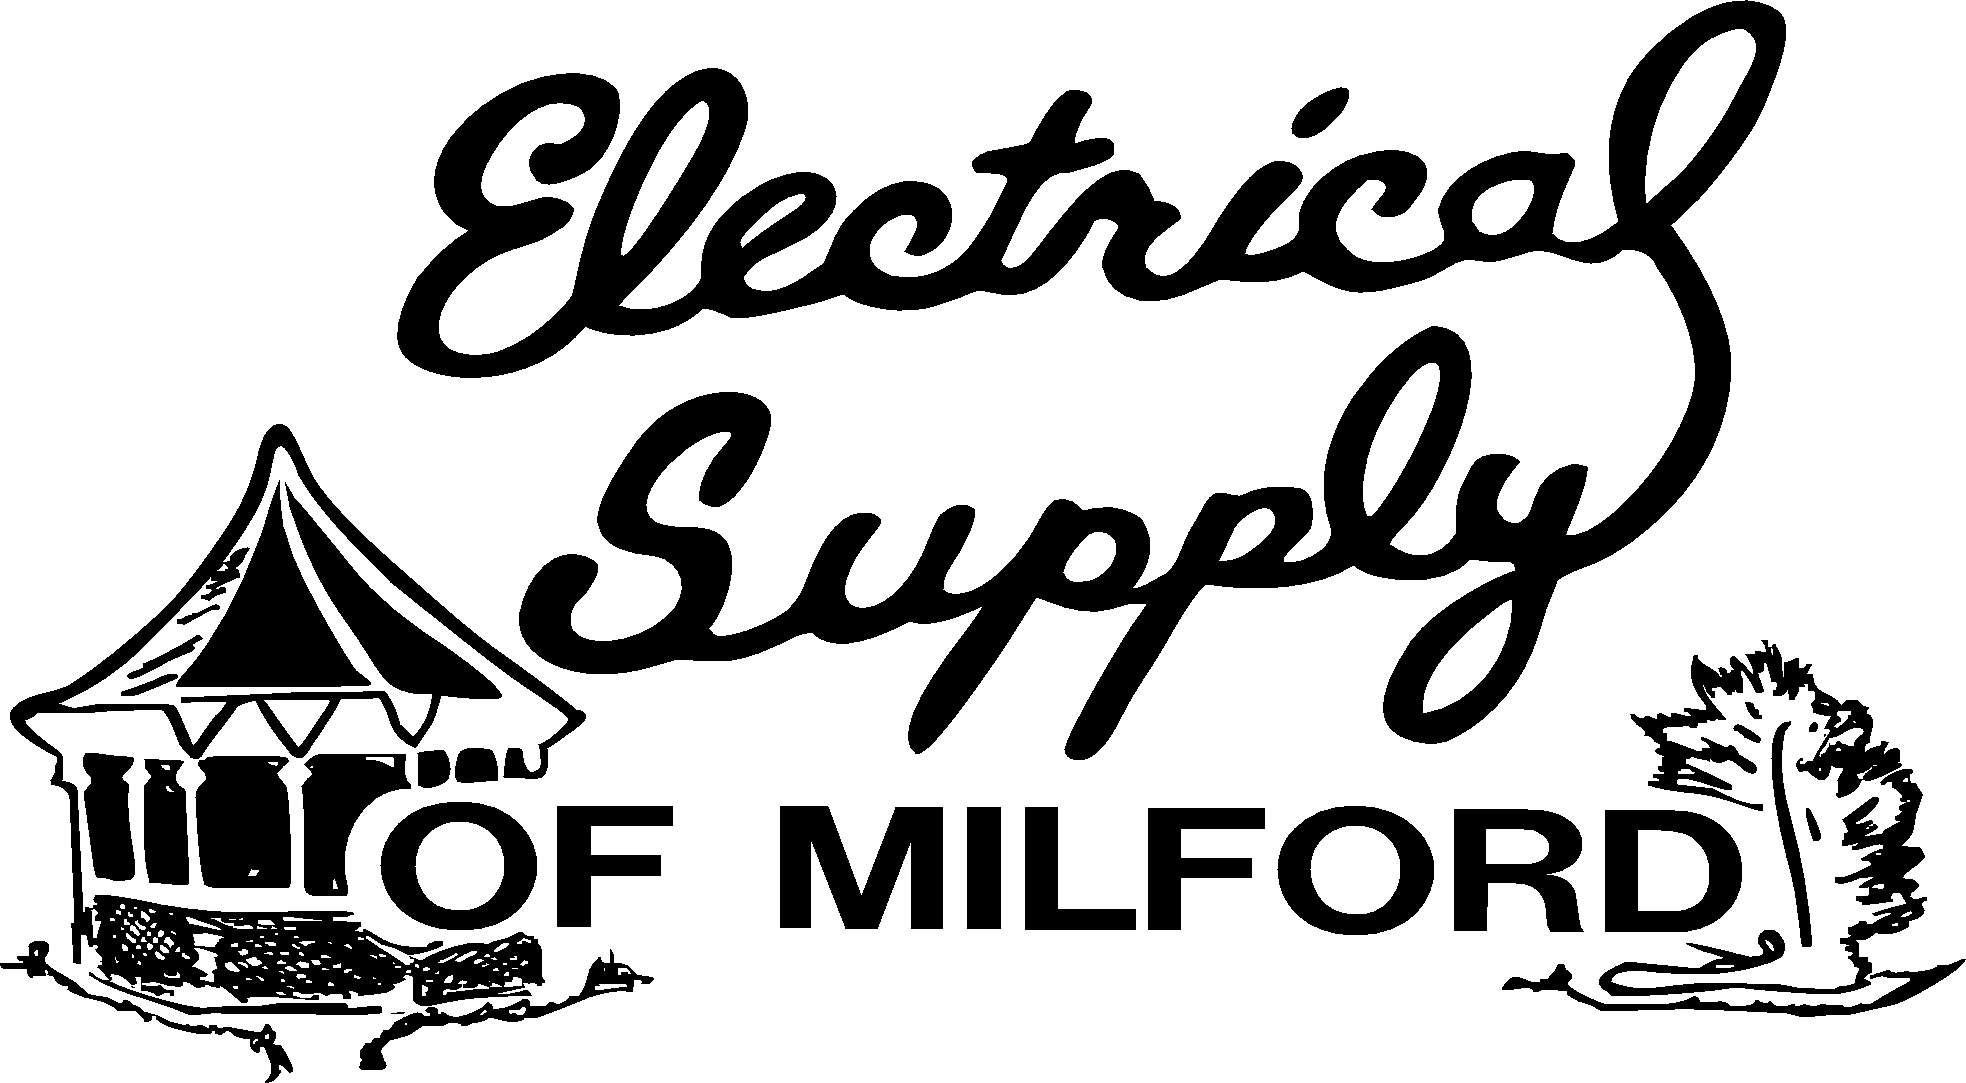 ELECTRICAL SUPPLY OF MILFORD